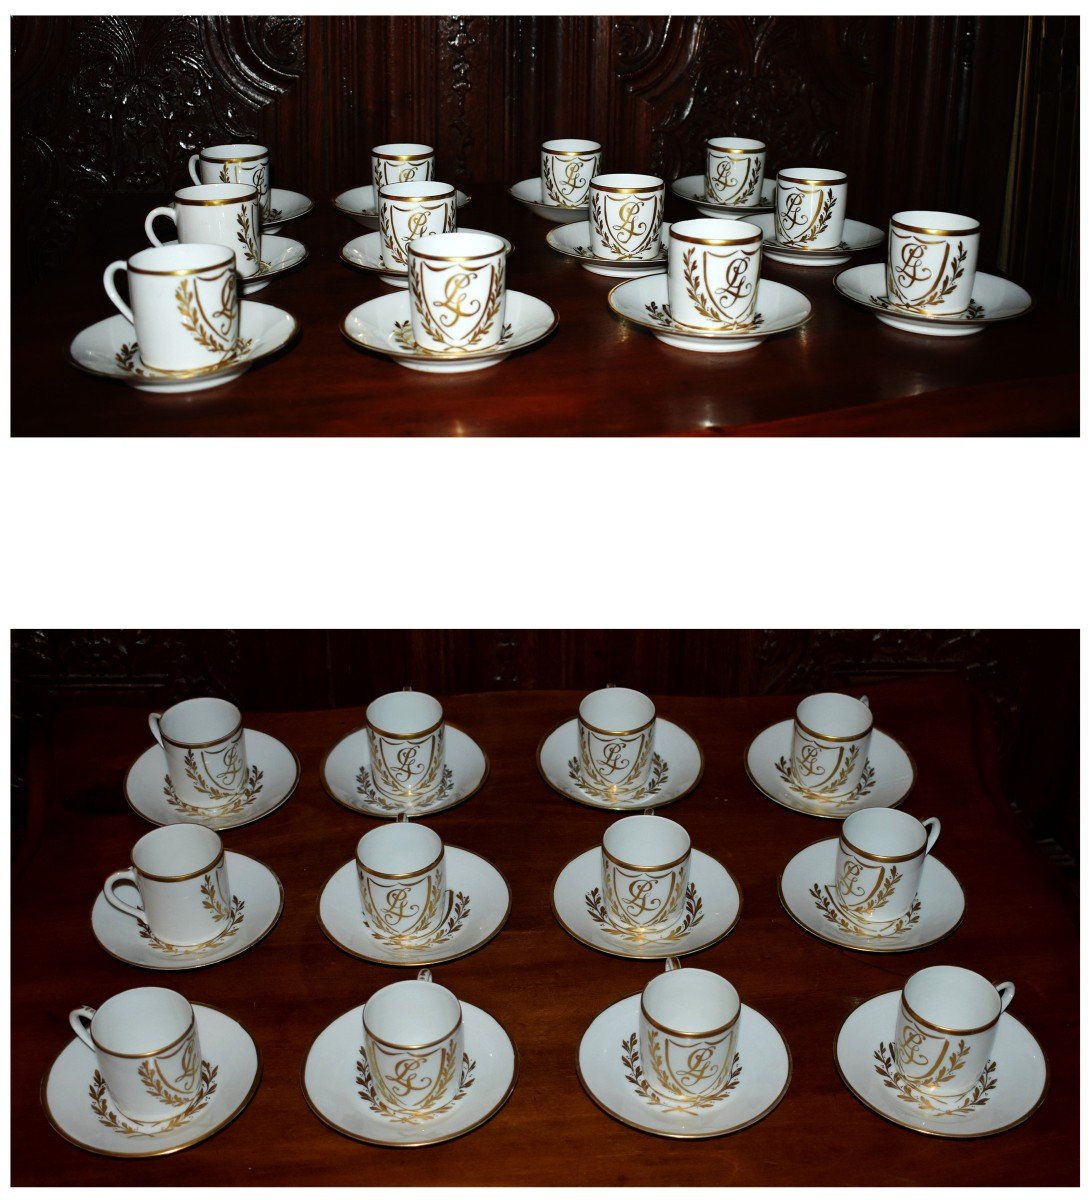 Limoges Porcelain Coffee Service With Laurel Decor And Lg Monogram, Empire Style.-photo-1